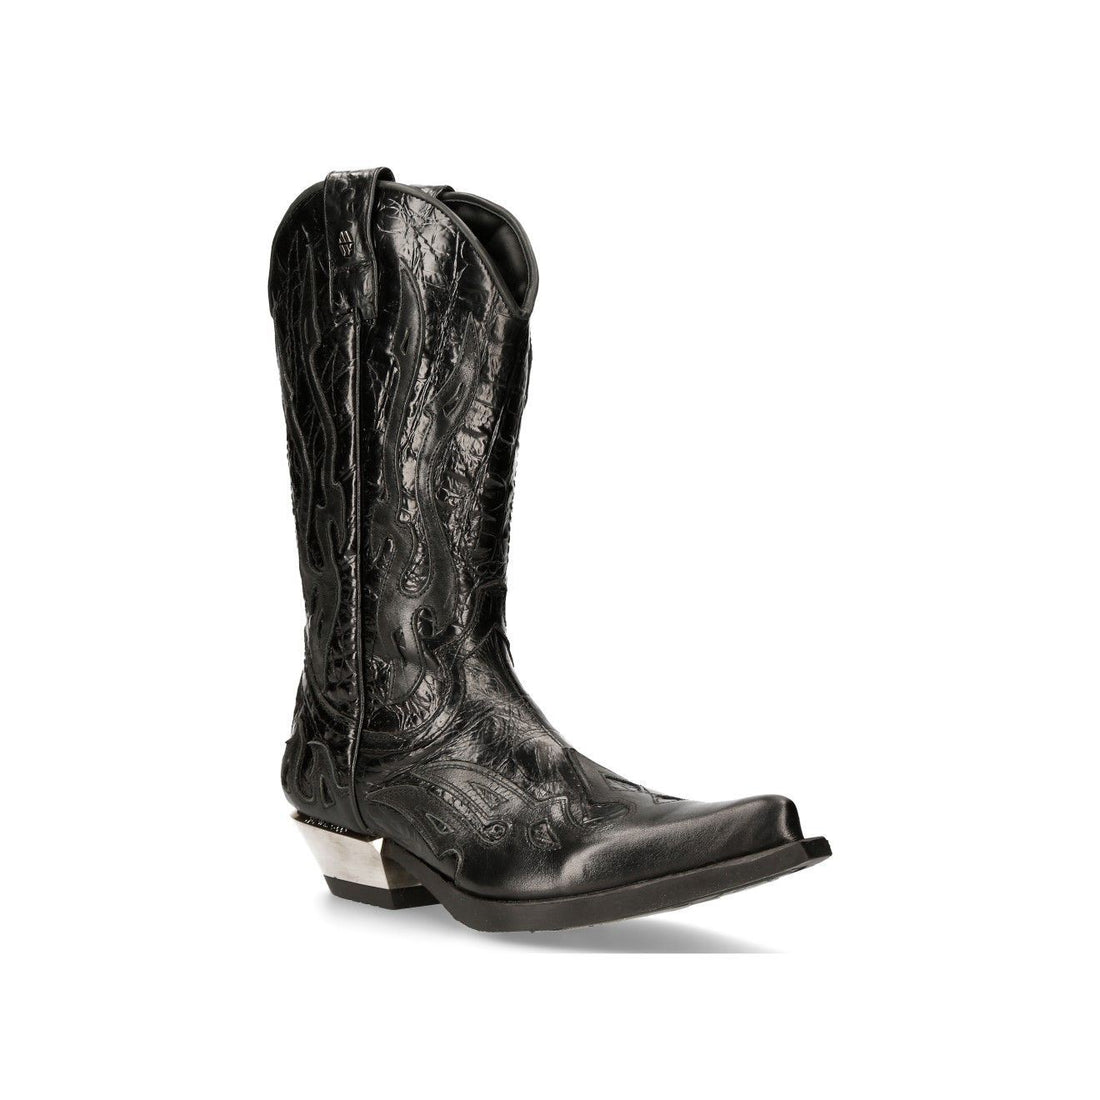 New Rock Flame Accented Black Leather Biker Cowboy Boots- M-7921-S1 - Upperclass Fashions 